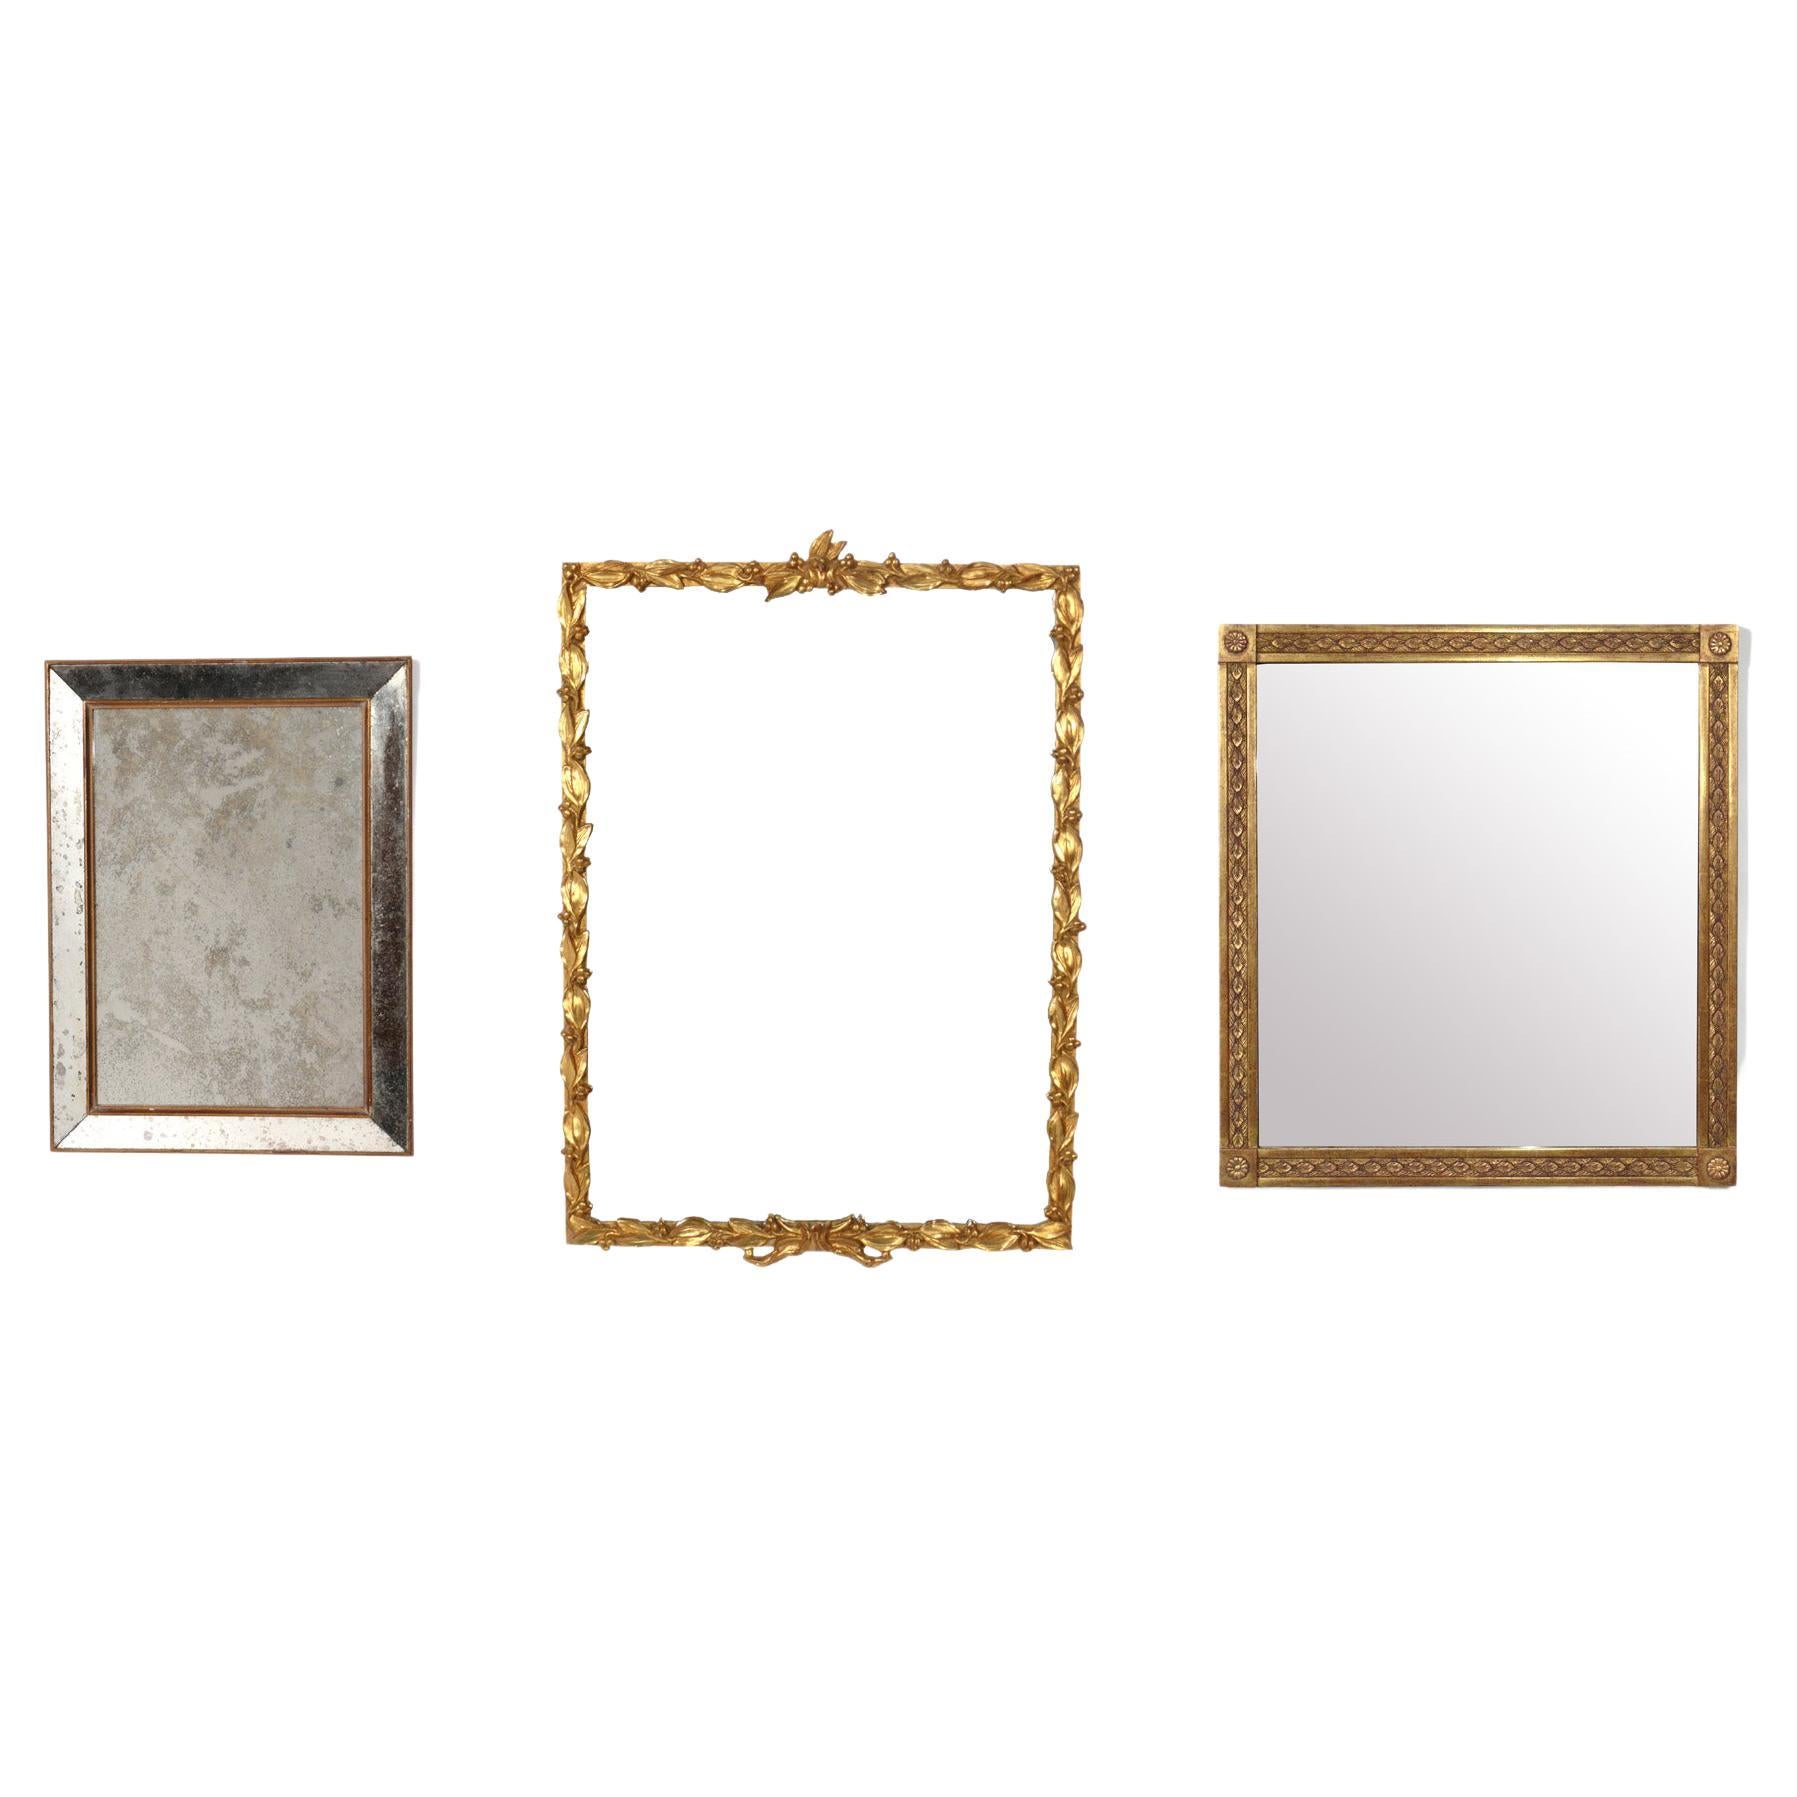 Selection of Petite Mirrors